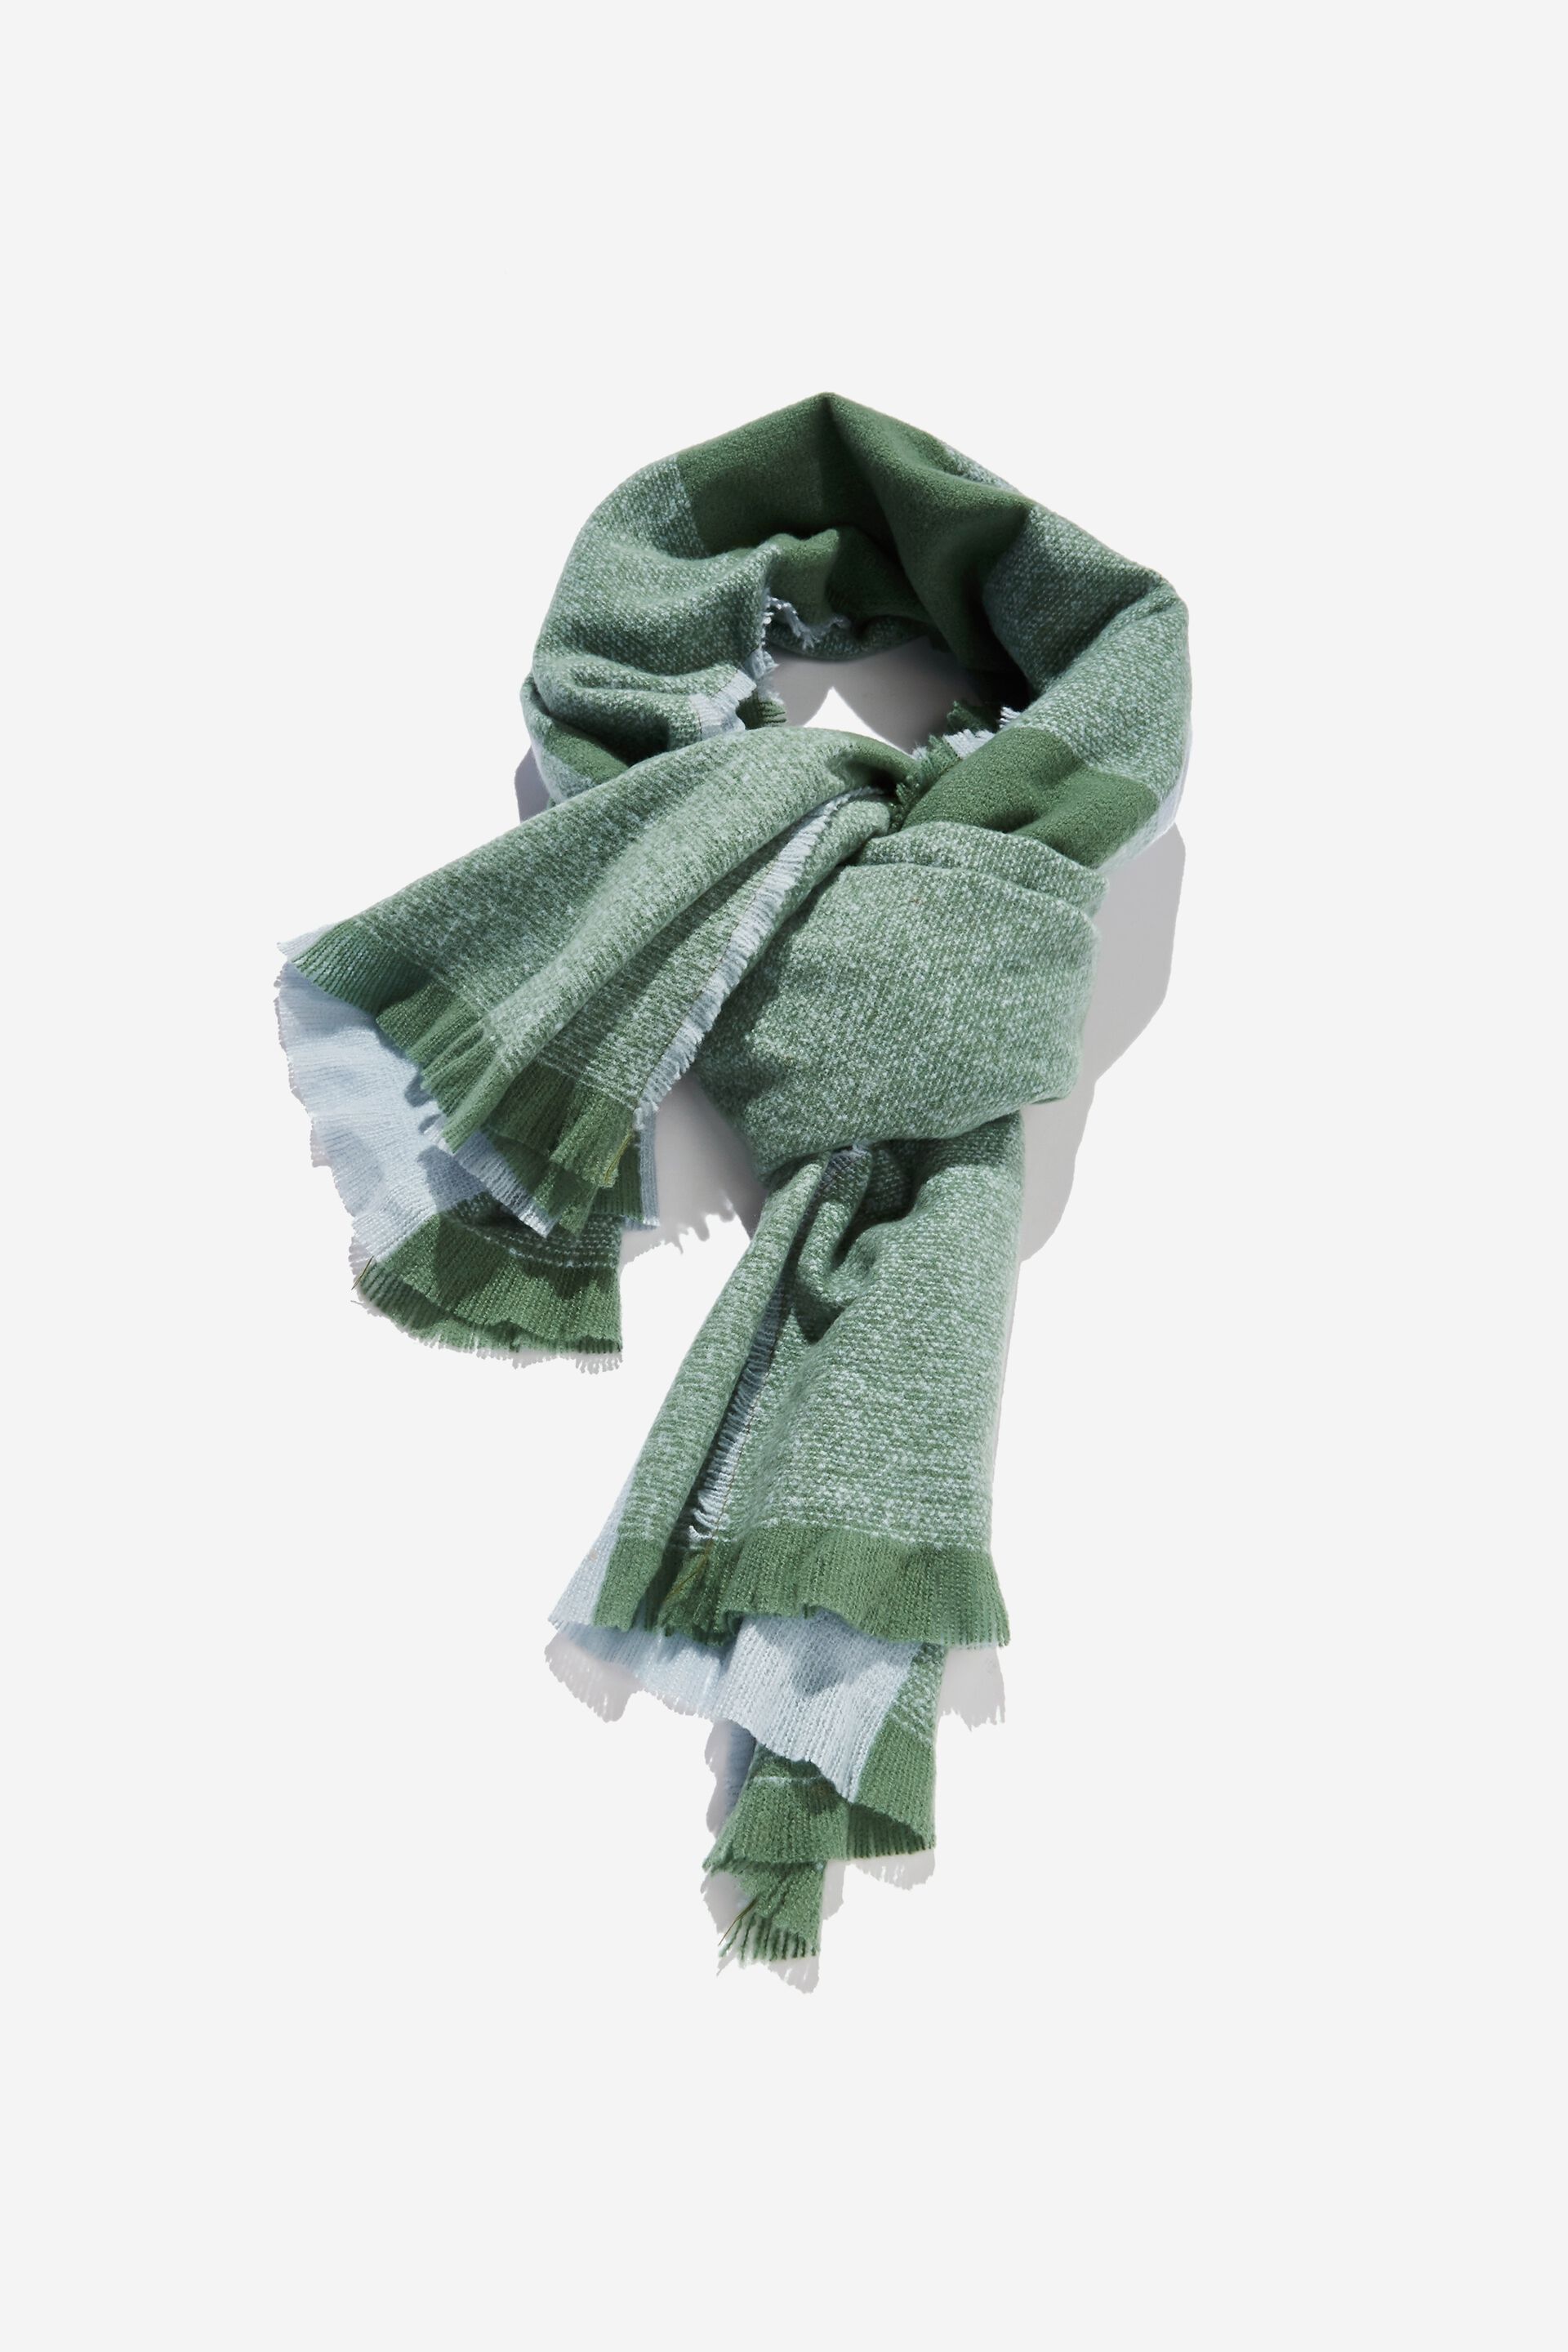 Gifts for Mother's Day | A Handy Scarf | Beanstalk Mums